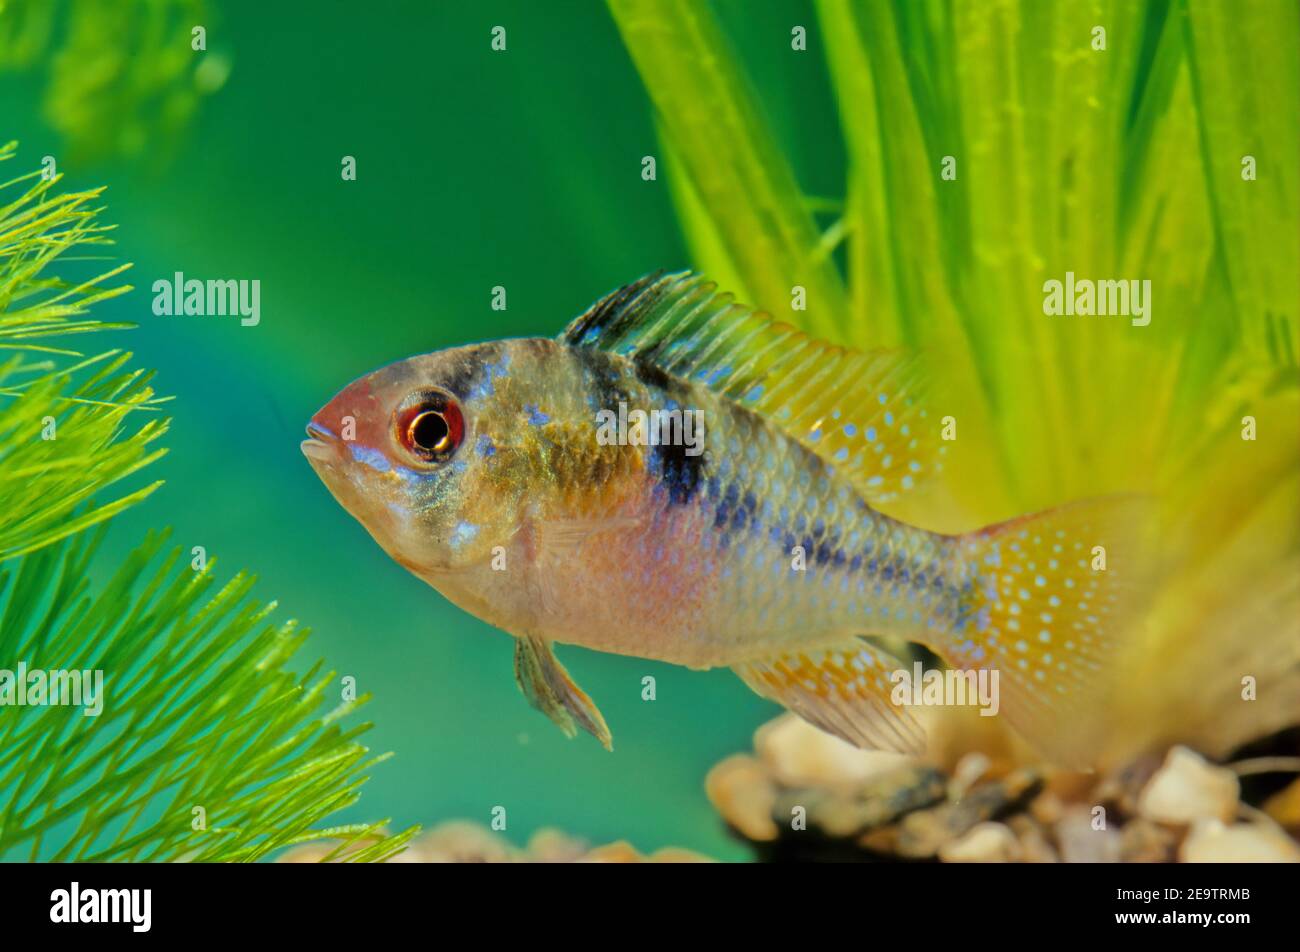 The blue ram, Mikrogeophagus ramirezi, is a species of freshwater fish endemic to the Orinoco River basin, in the savannahs of Venezuela and Colombia Stock Photo